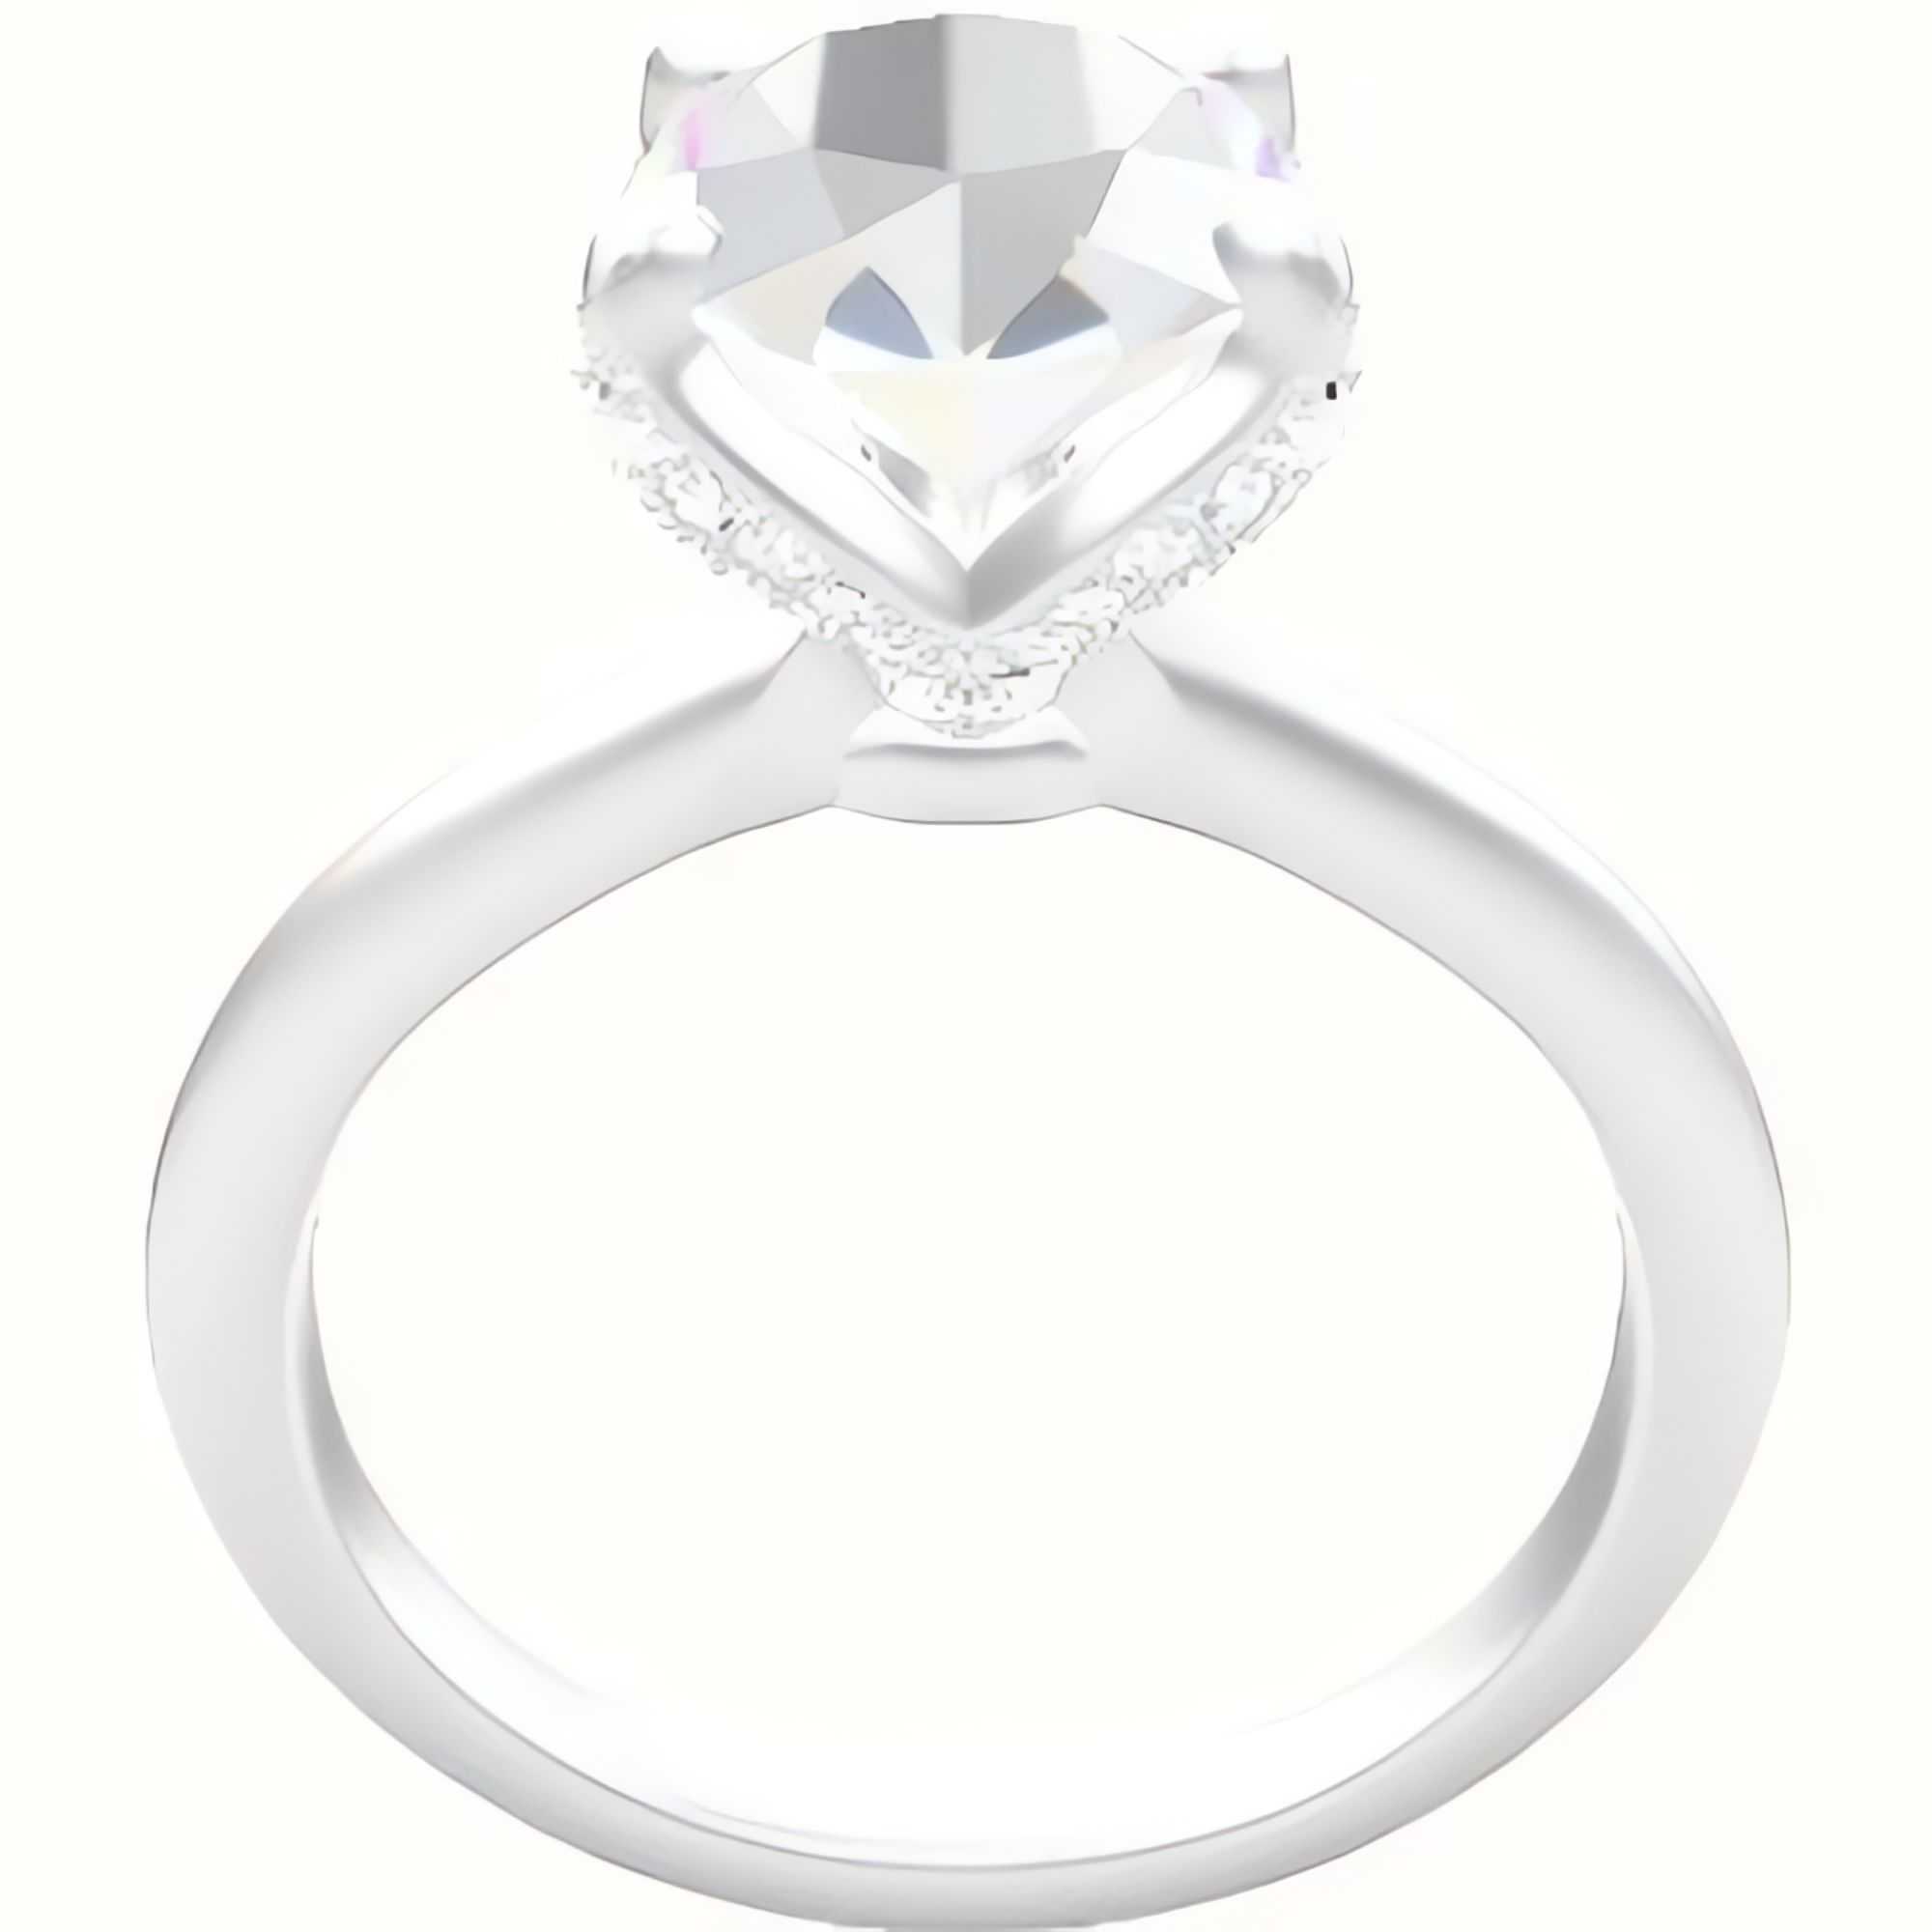 Beveled Solitaire Engagement Ring With Pave Petal Four Prong Head